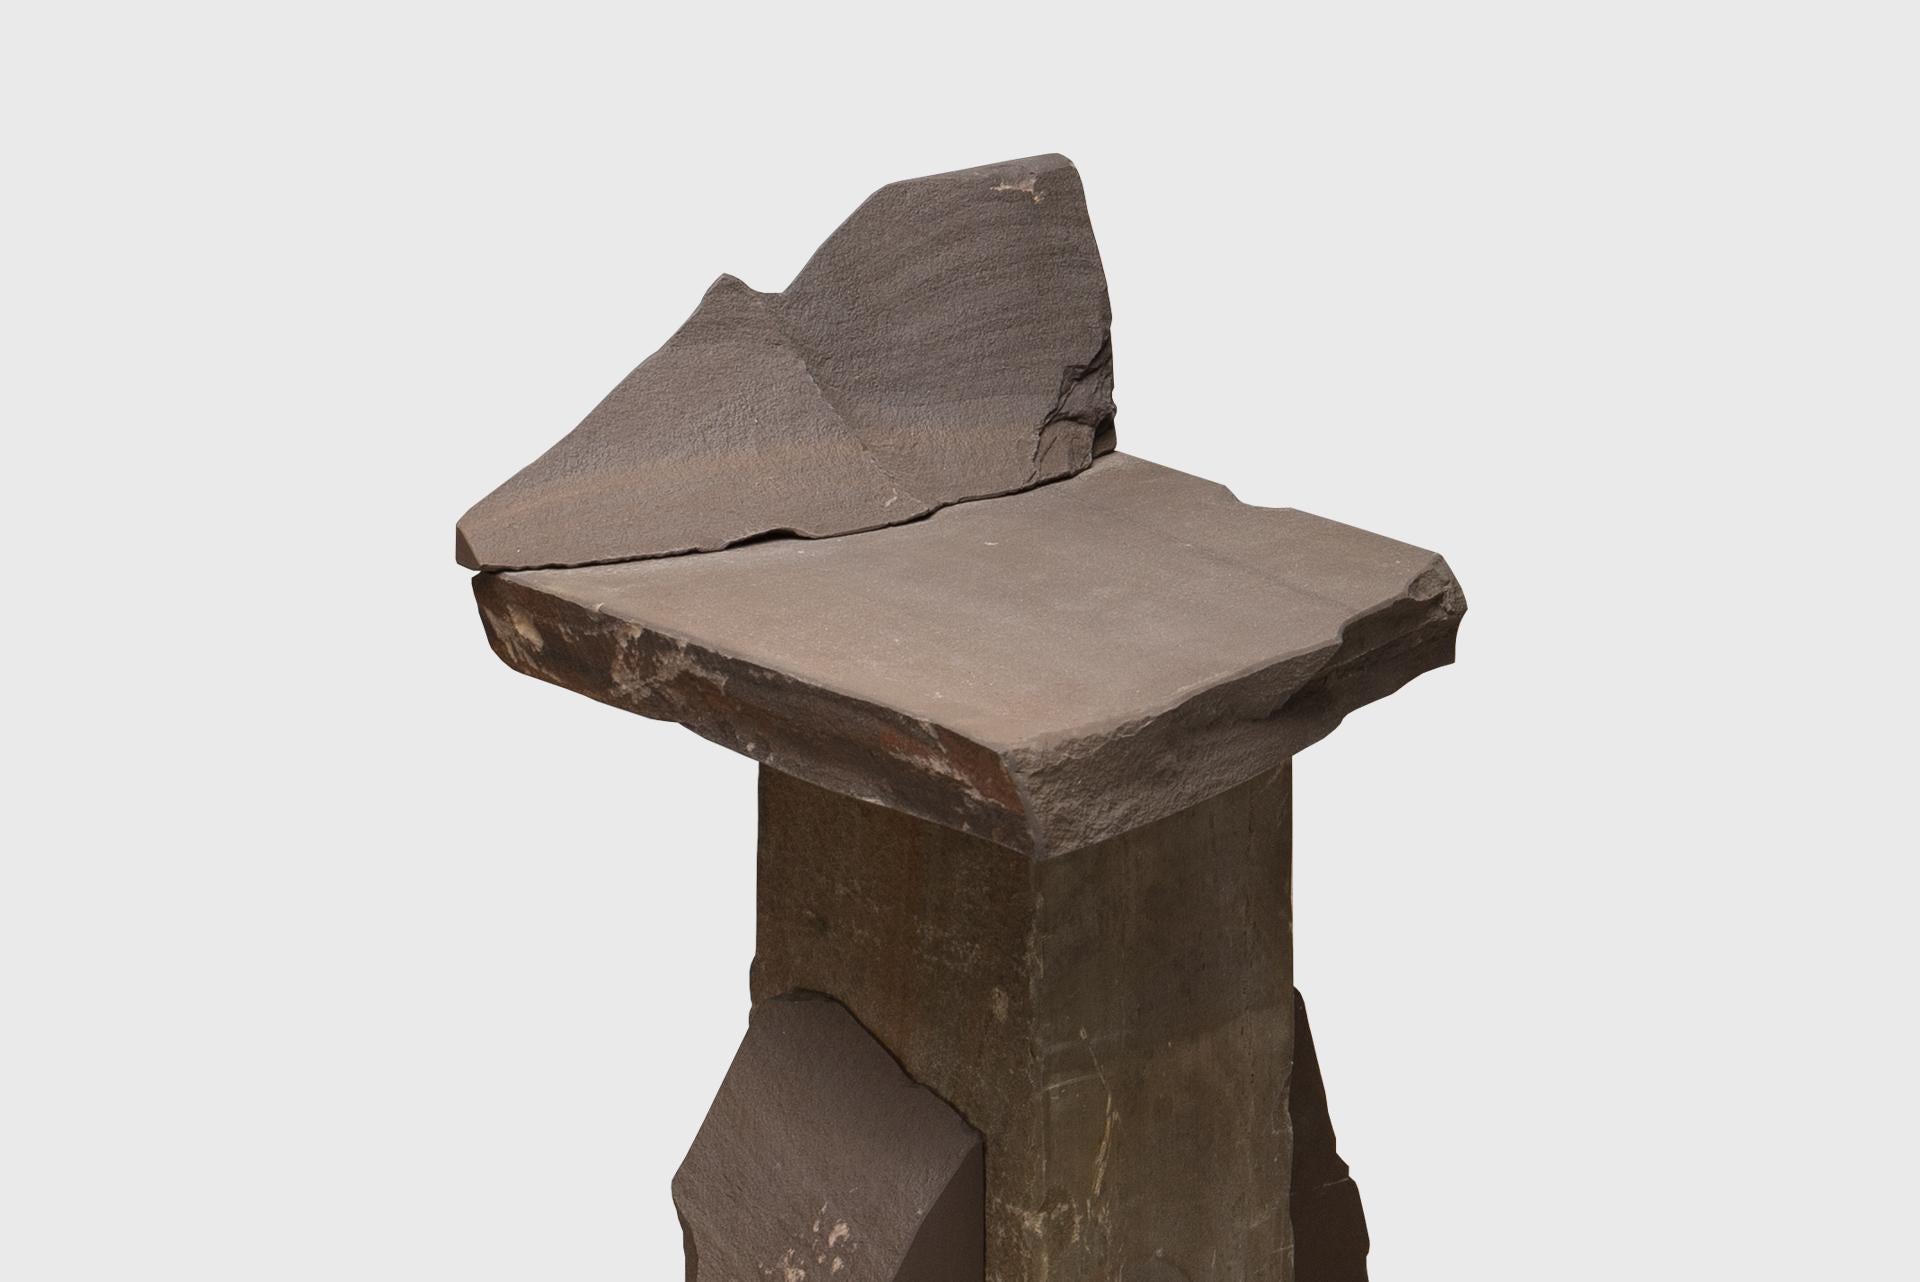 Contemporary Natural Chair 14, Graywacke Offcut Gray Stone, Carsten in der Elst For Sale 5